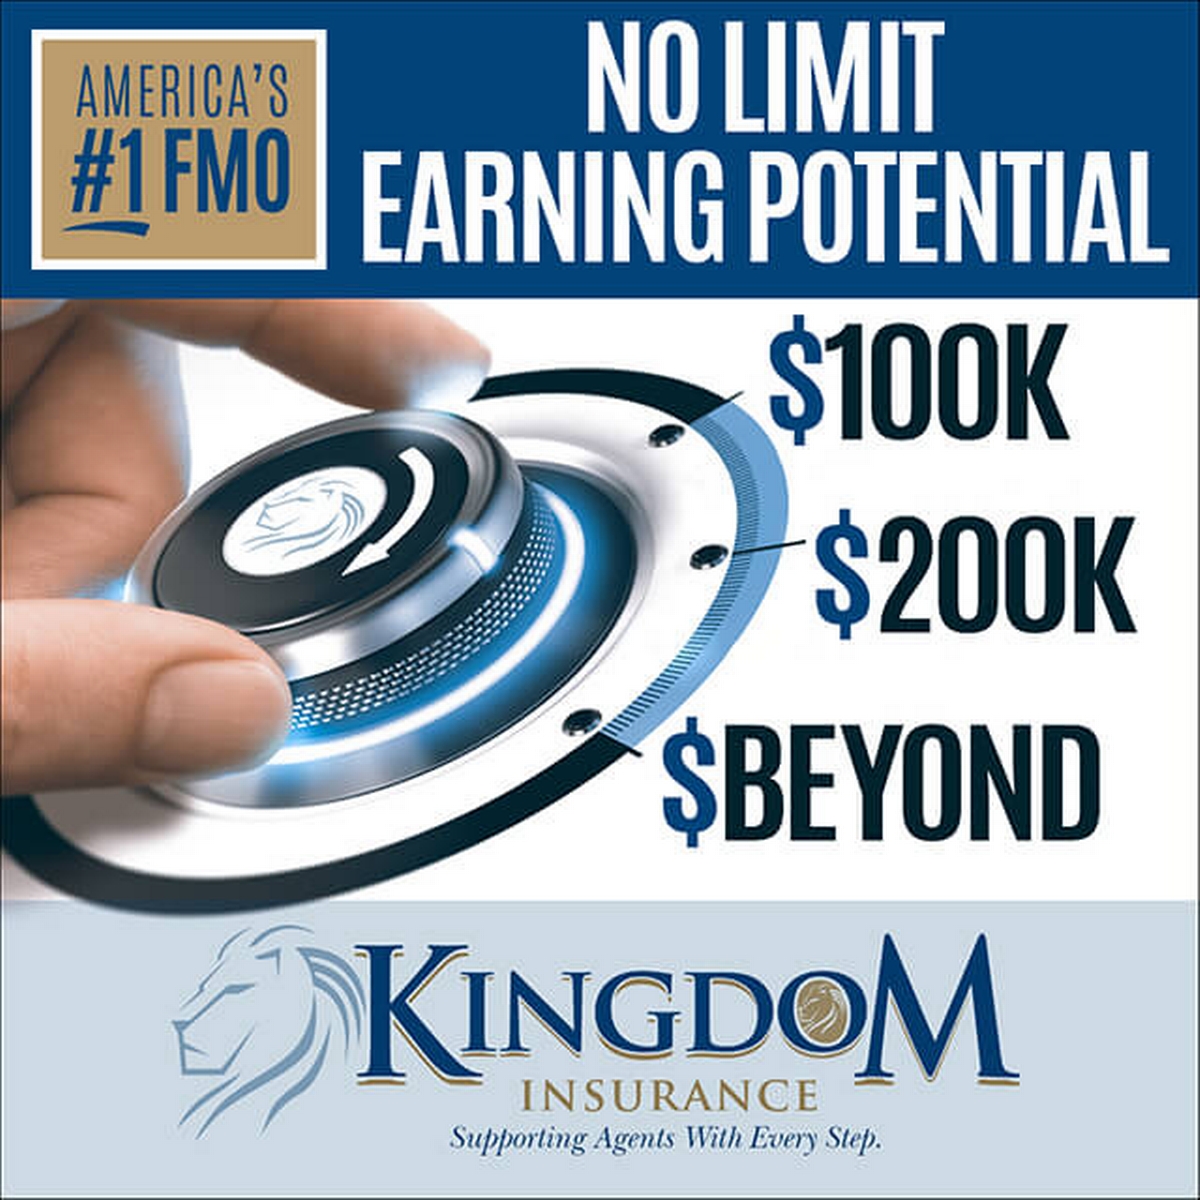 No Limit Earning Potential - $100K, $250K, and Beyond!